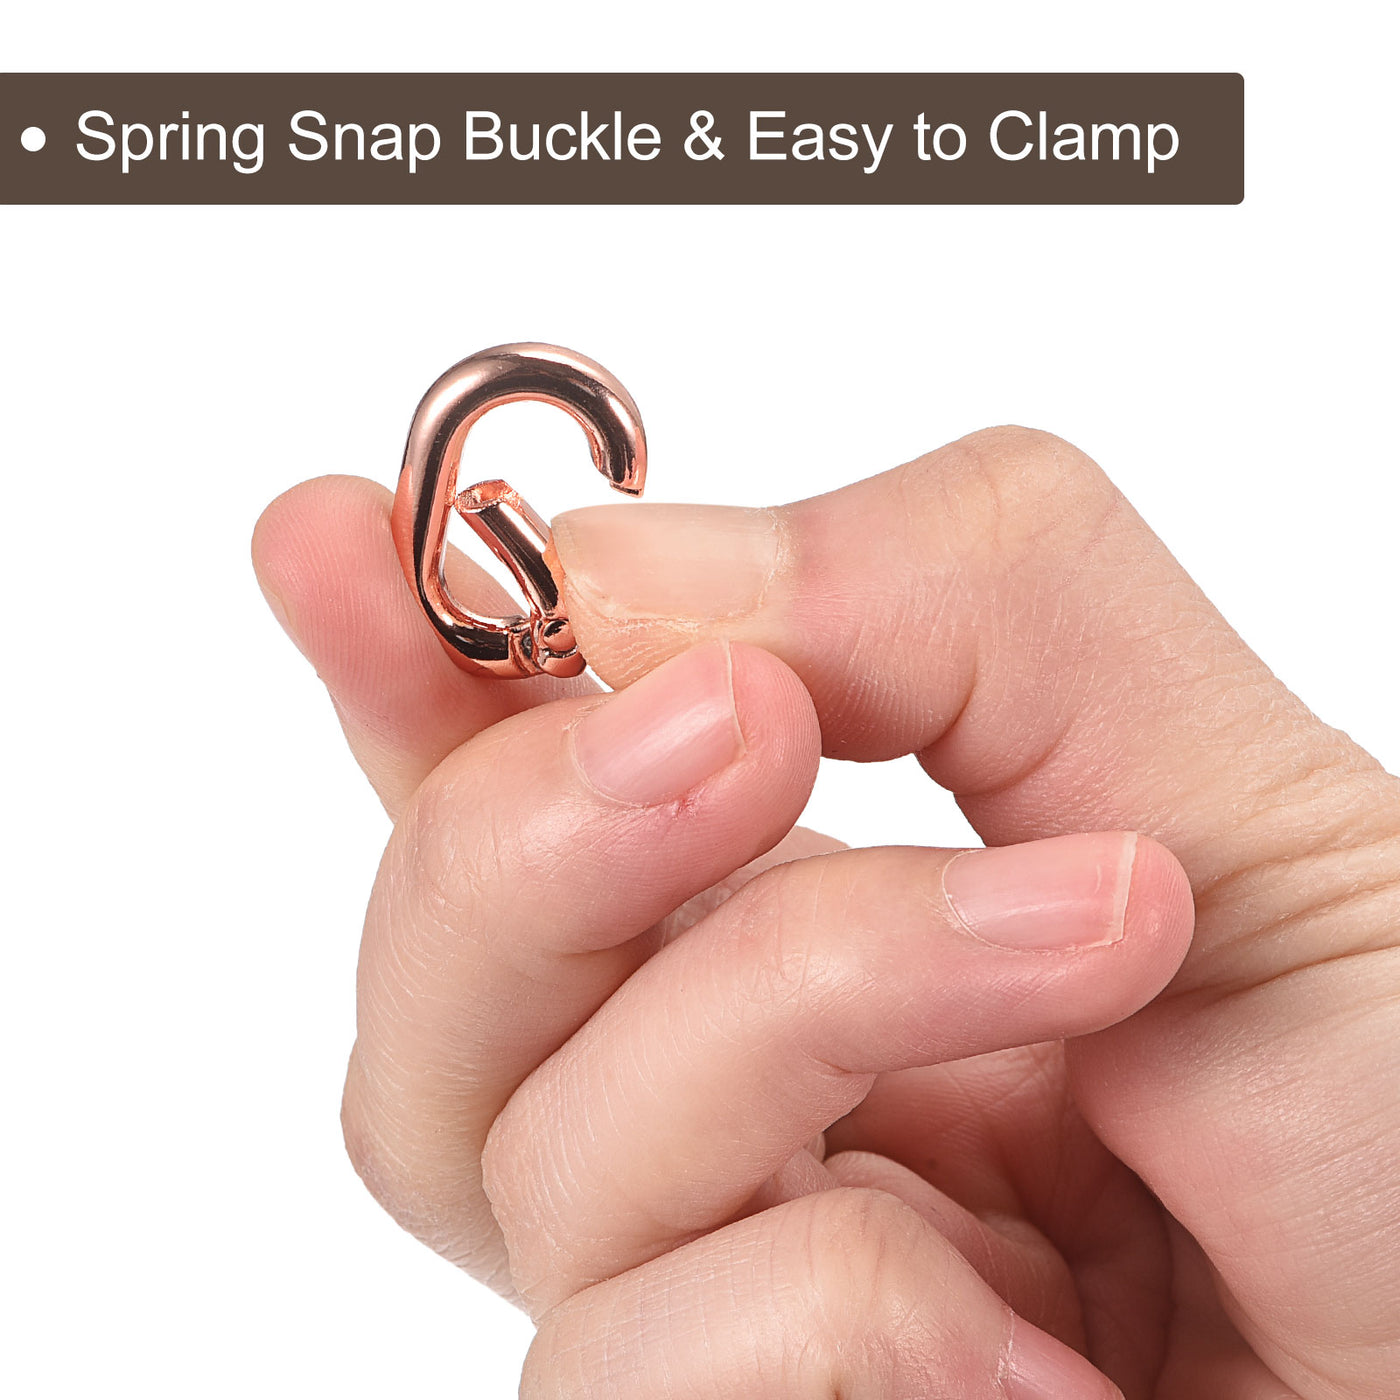 uxcell Uxcell 0.83" Spring Oval Ring Snap Clip Trigger for Bag Purse Keychain, 4Pcs Rose Gold